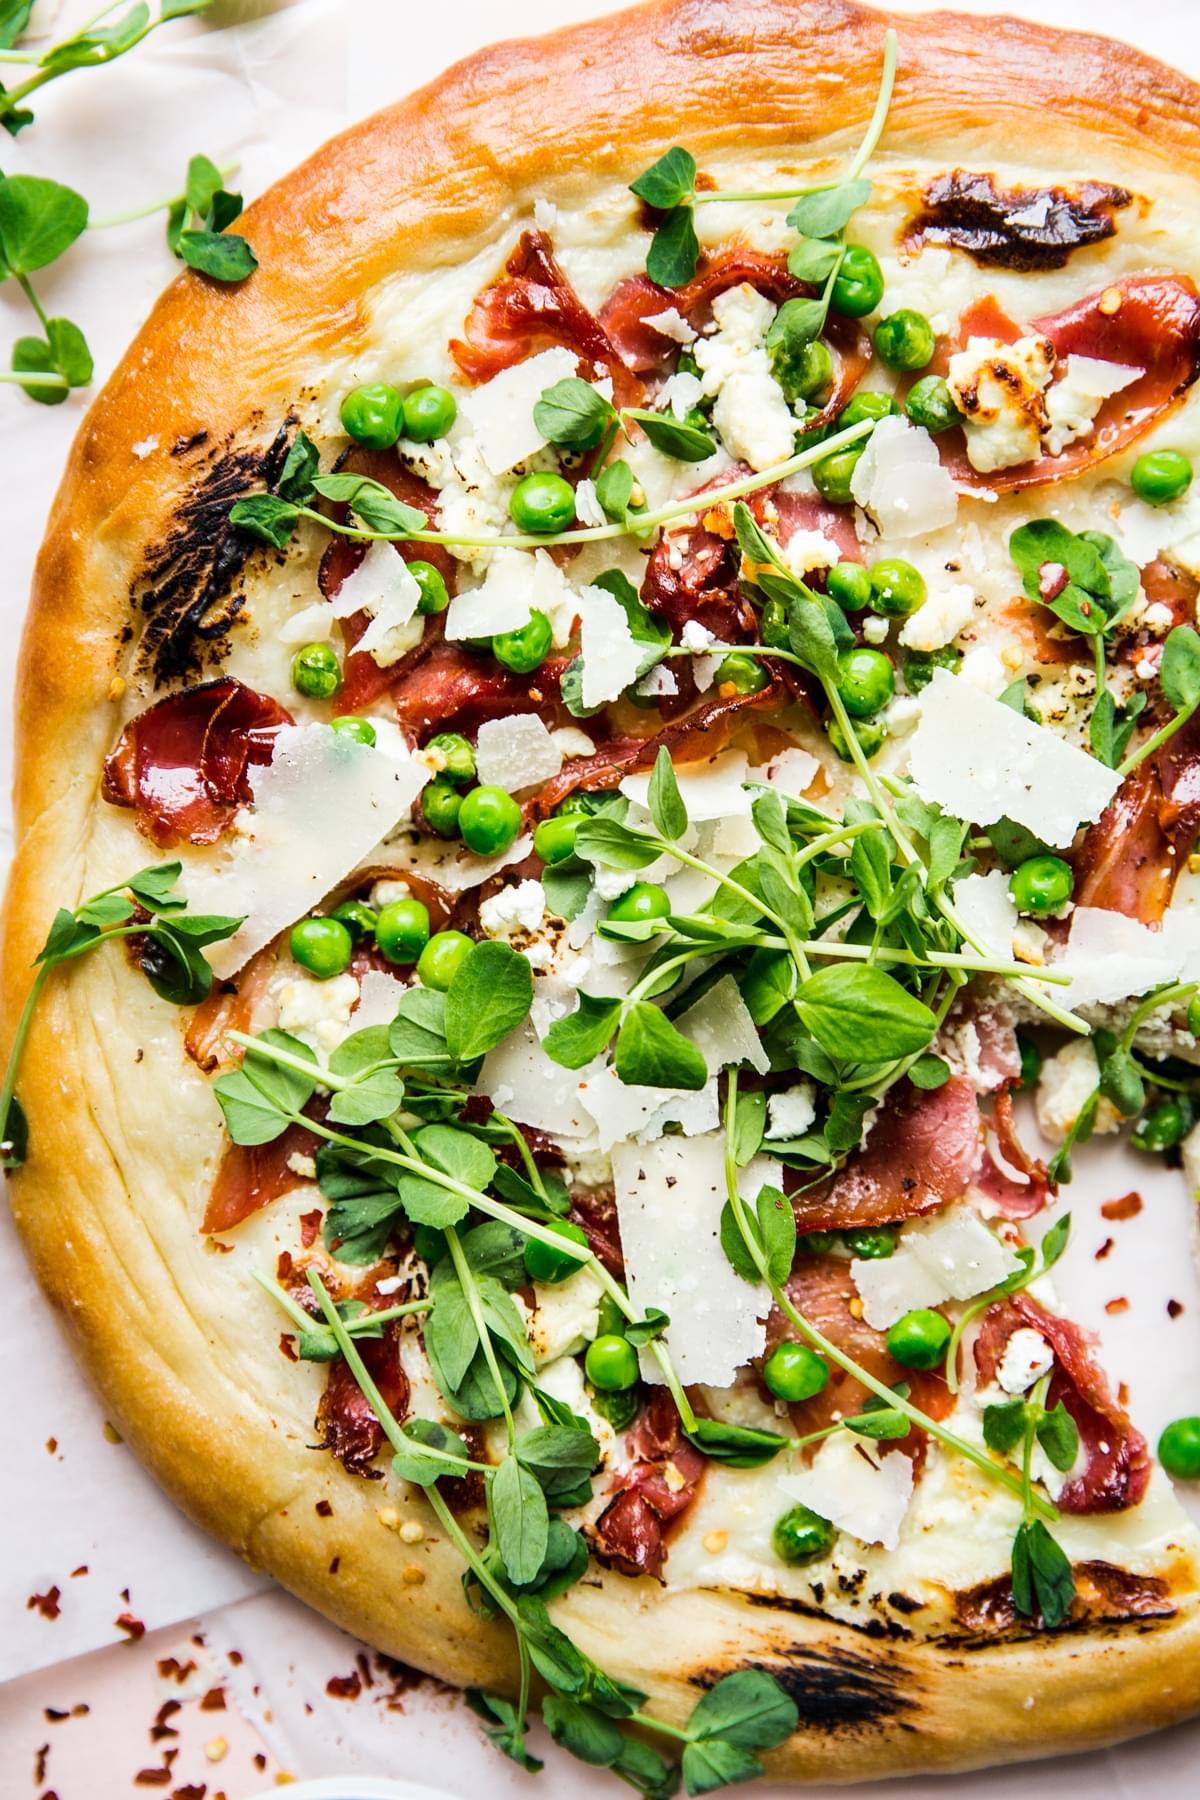 Pea and prosciutto pizza with goat cheese cream sauce parmesan cheese spring pizza with micro greens and pepper flakes